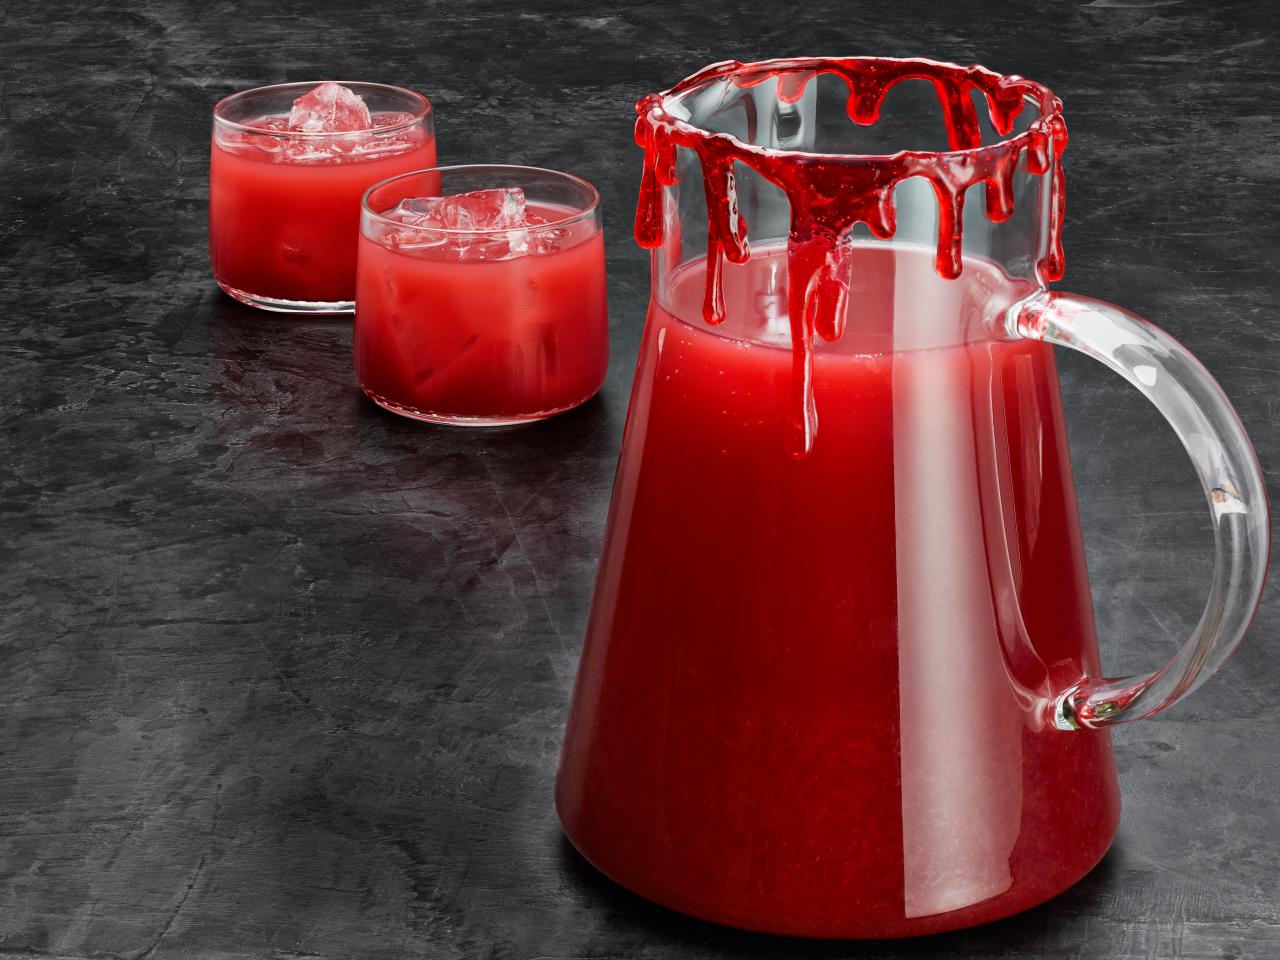 Make this orange Halloween party pitcher cocktail for a crowd